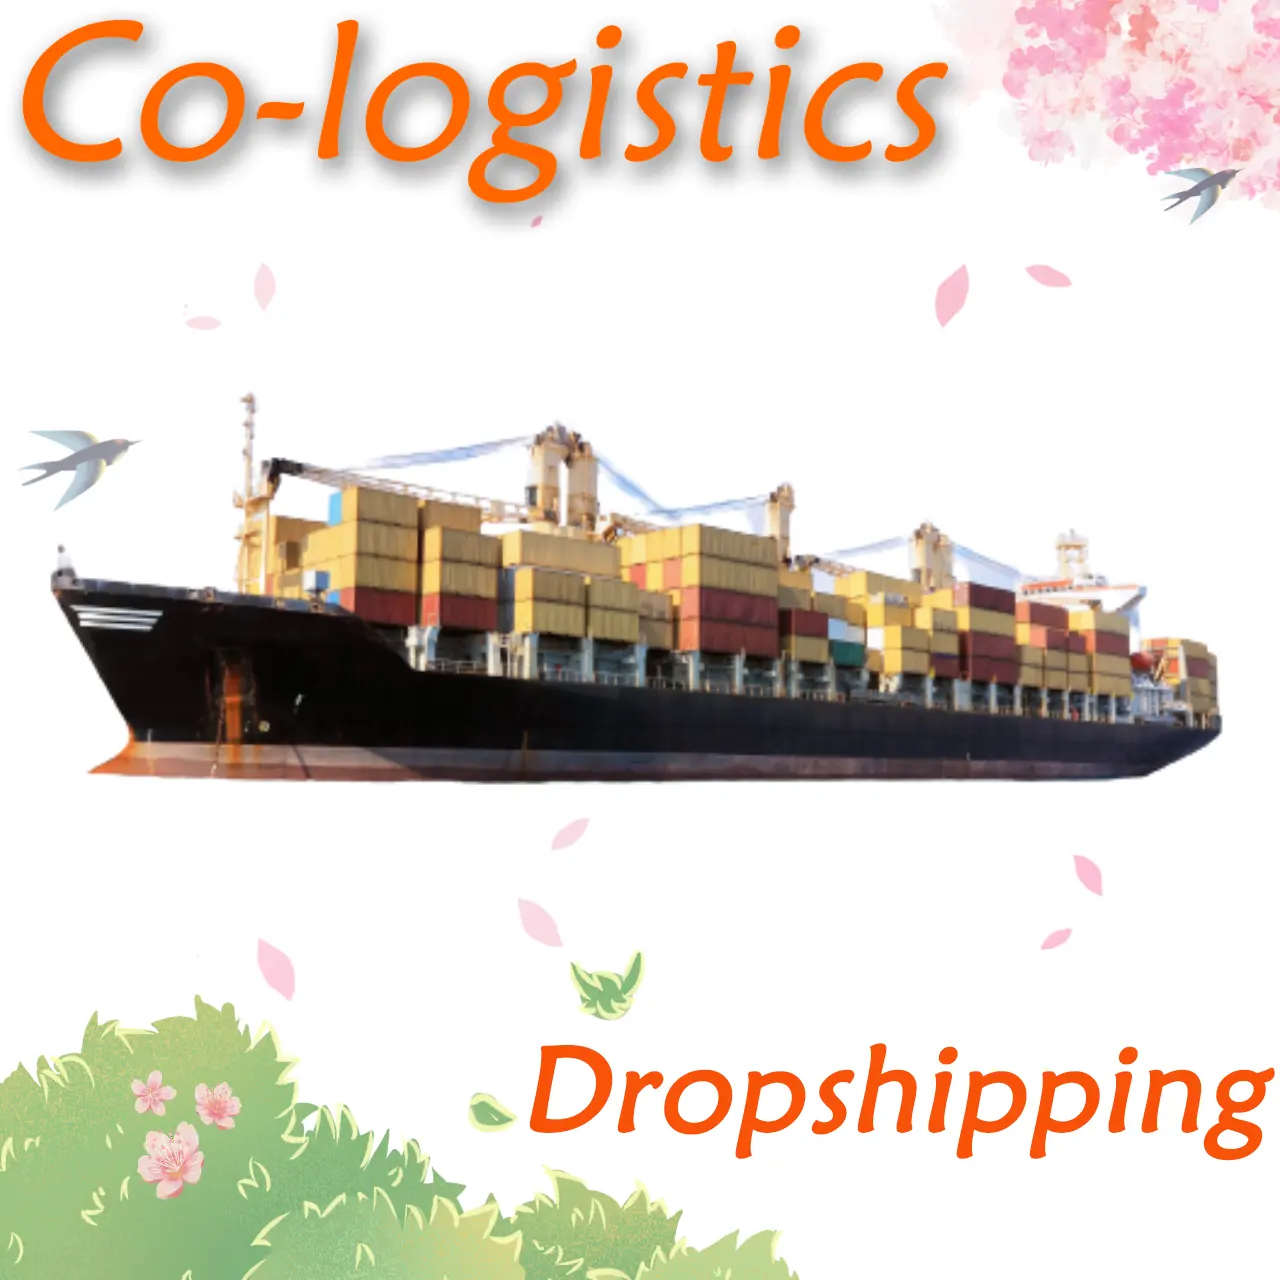 The lowest price by fast ship and normal ship DDP from Shanghai/Yiwu/Shenzhen/Guangzhou to USA warehouse